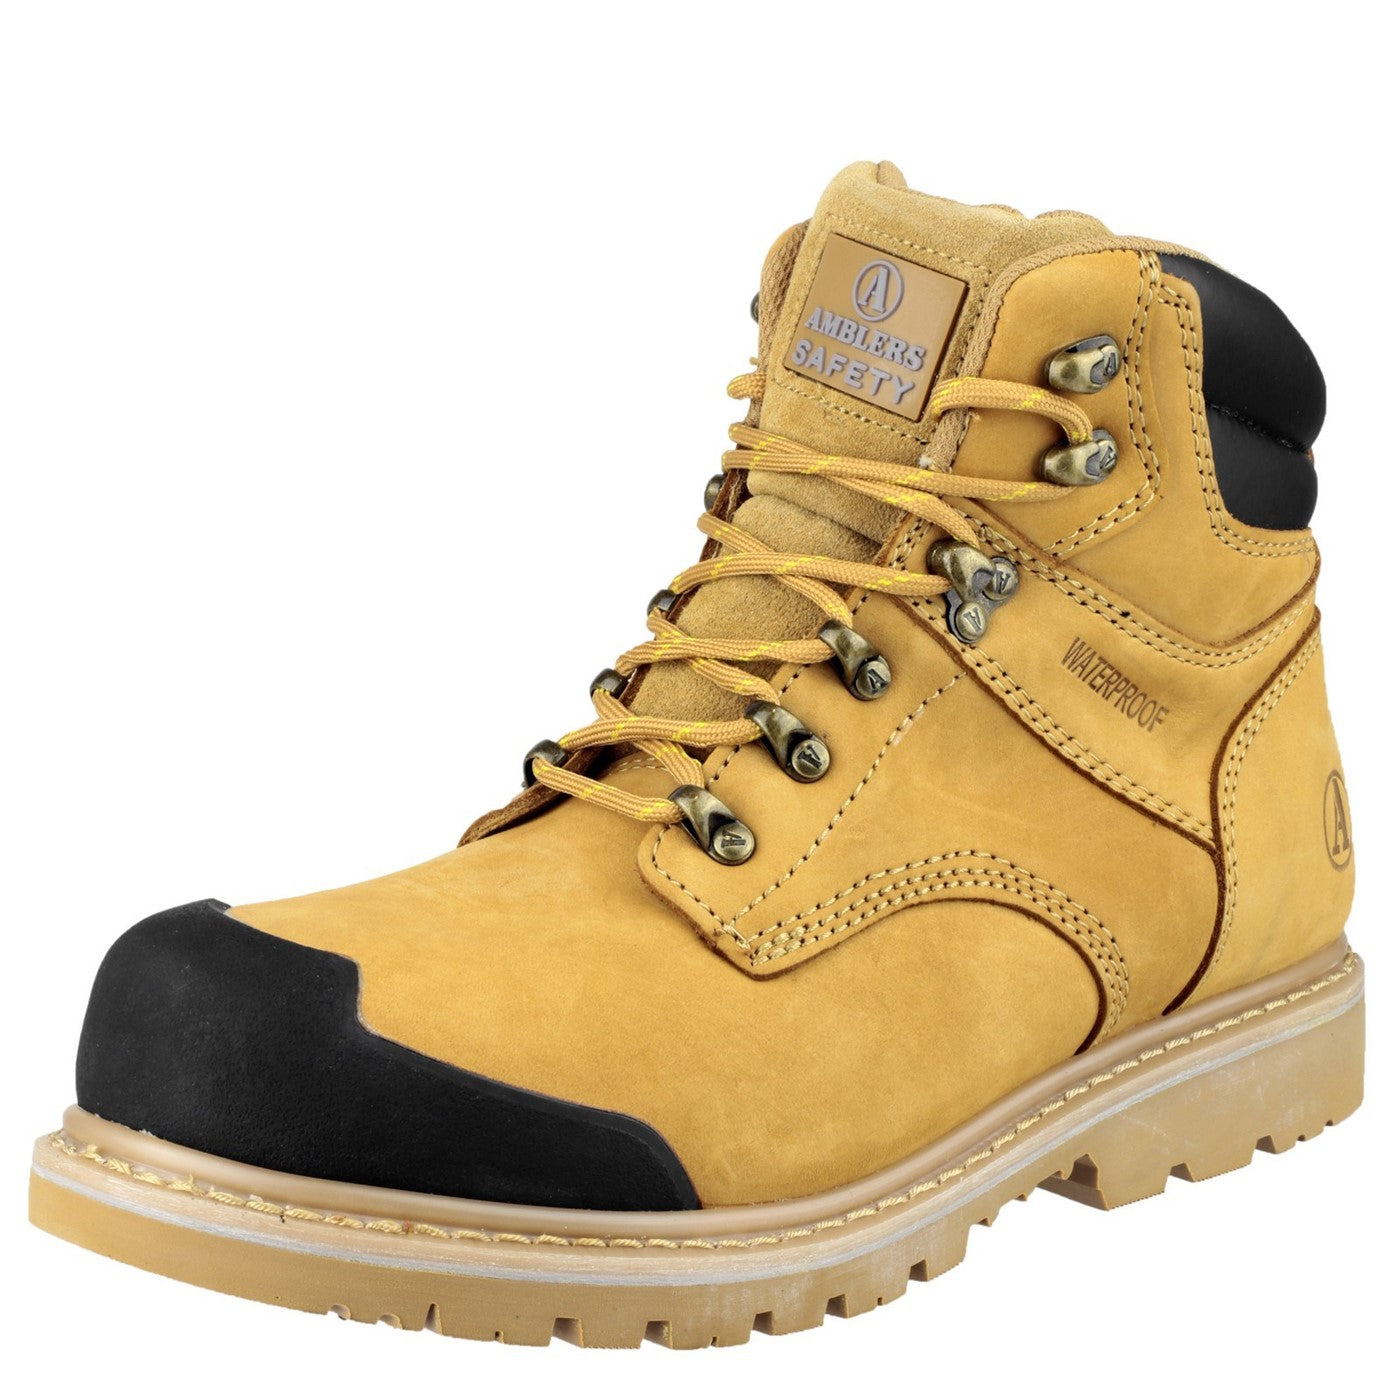 Men's Amblers Safety FS226 Industrial Safety Boot